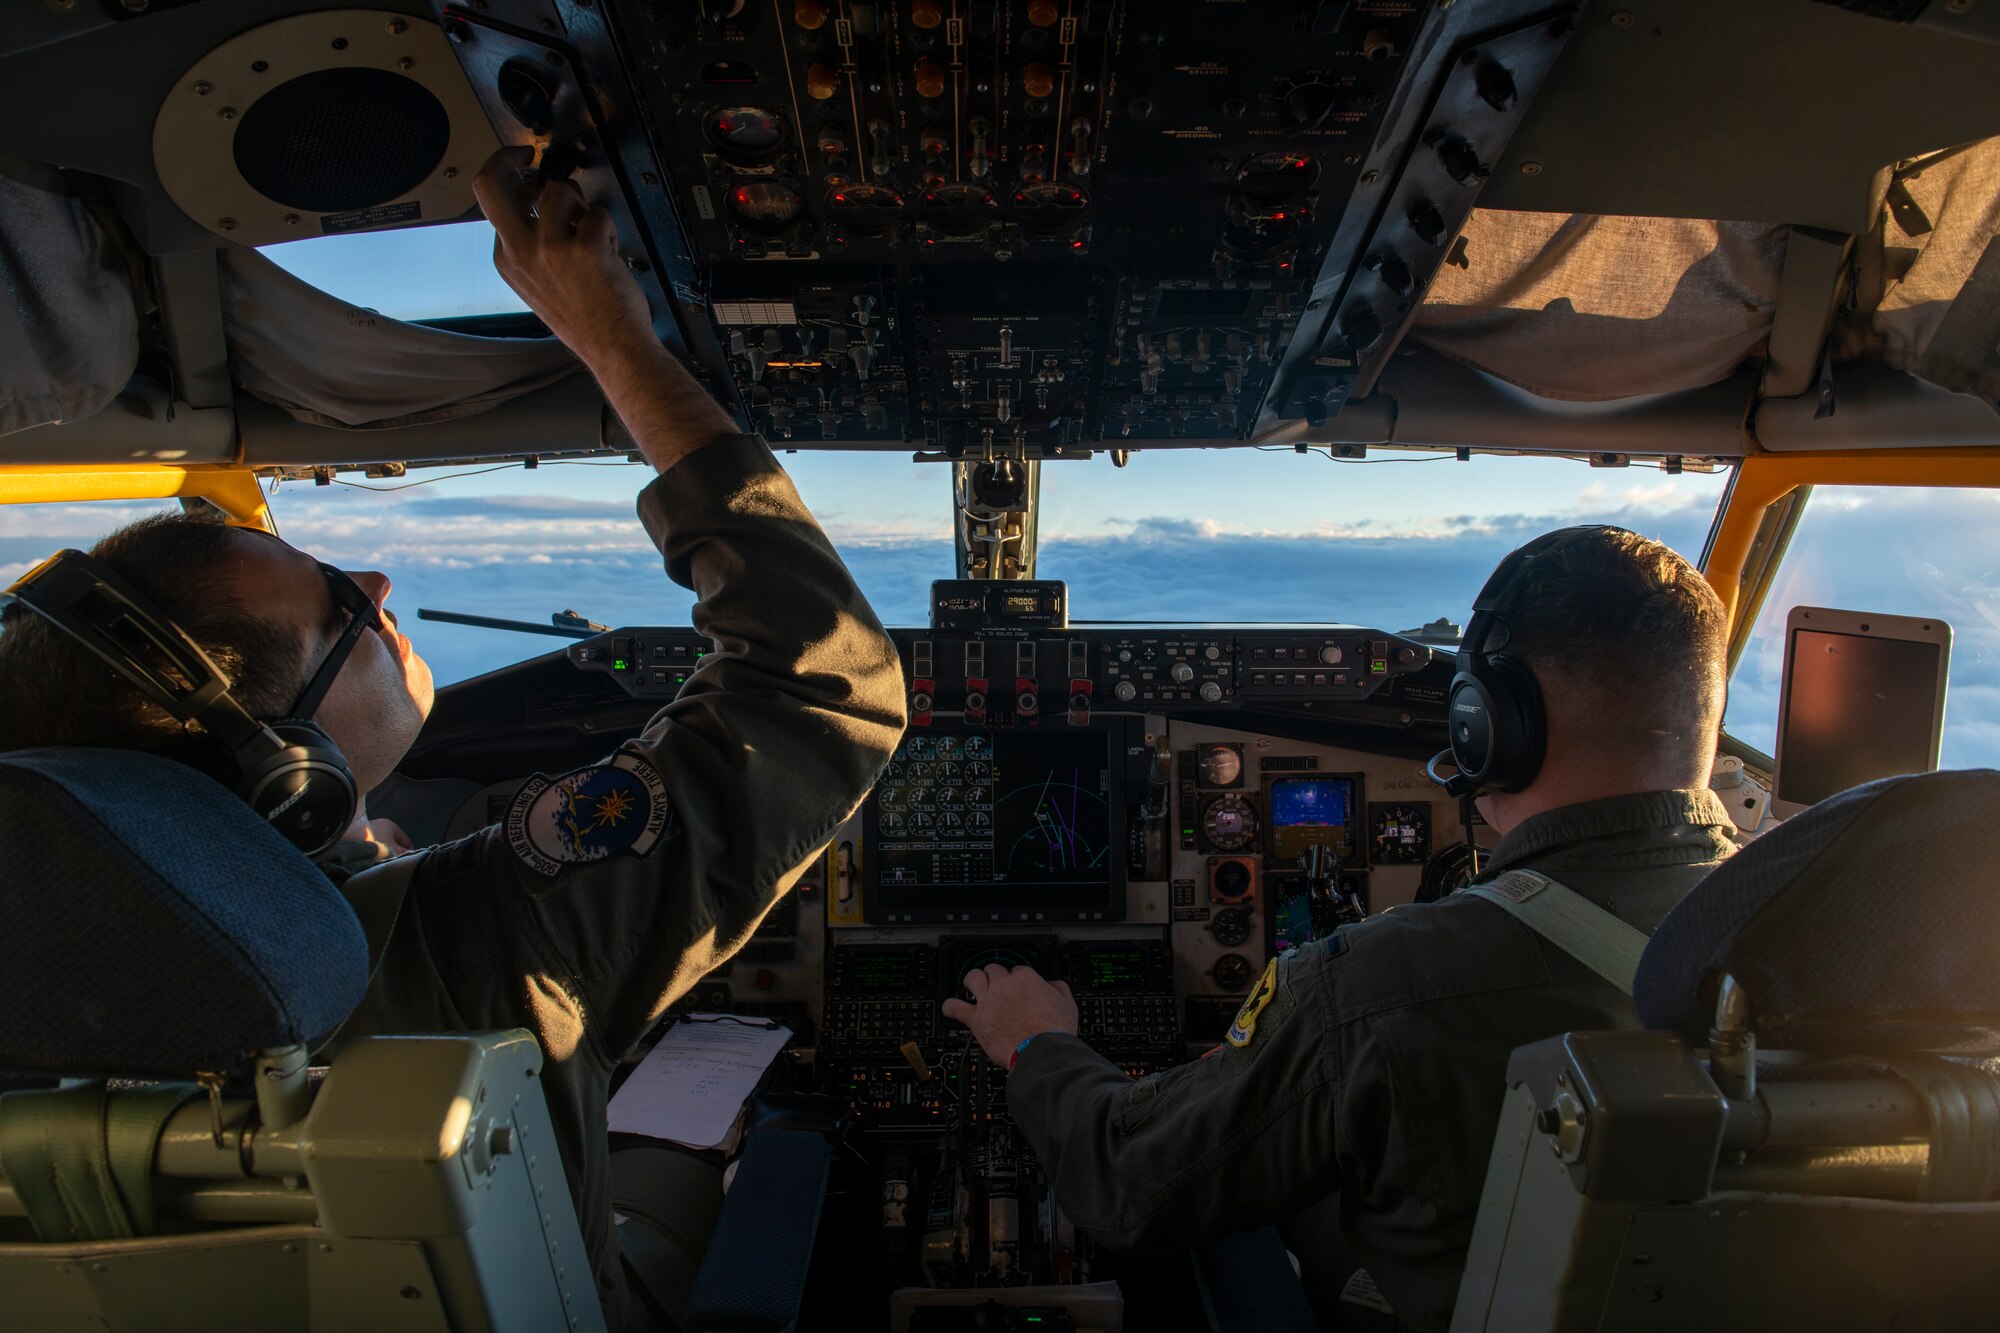 U.S. Air Force Capt. Austin Martin, 909th Air Refueling Squadron aircraft commander, left, and 1st Lt. Kyle Weinell, 909th Air Refueling Squadron pilot, operate a KC-135R Stratotanker during refueling over the Pacific Ocean in support of a Bomber Task Force mission, Jan. 11, 2022. The 909th ARS supported the BTF, which aligns with the National Defense Strategy’s objectives of strategic predictability and operational unpredictability. (U.S. Air Force photo by Airman 1st Class Moses Taylor)